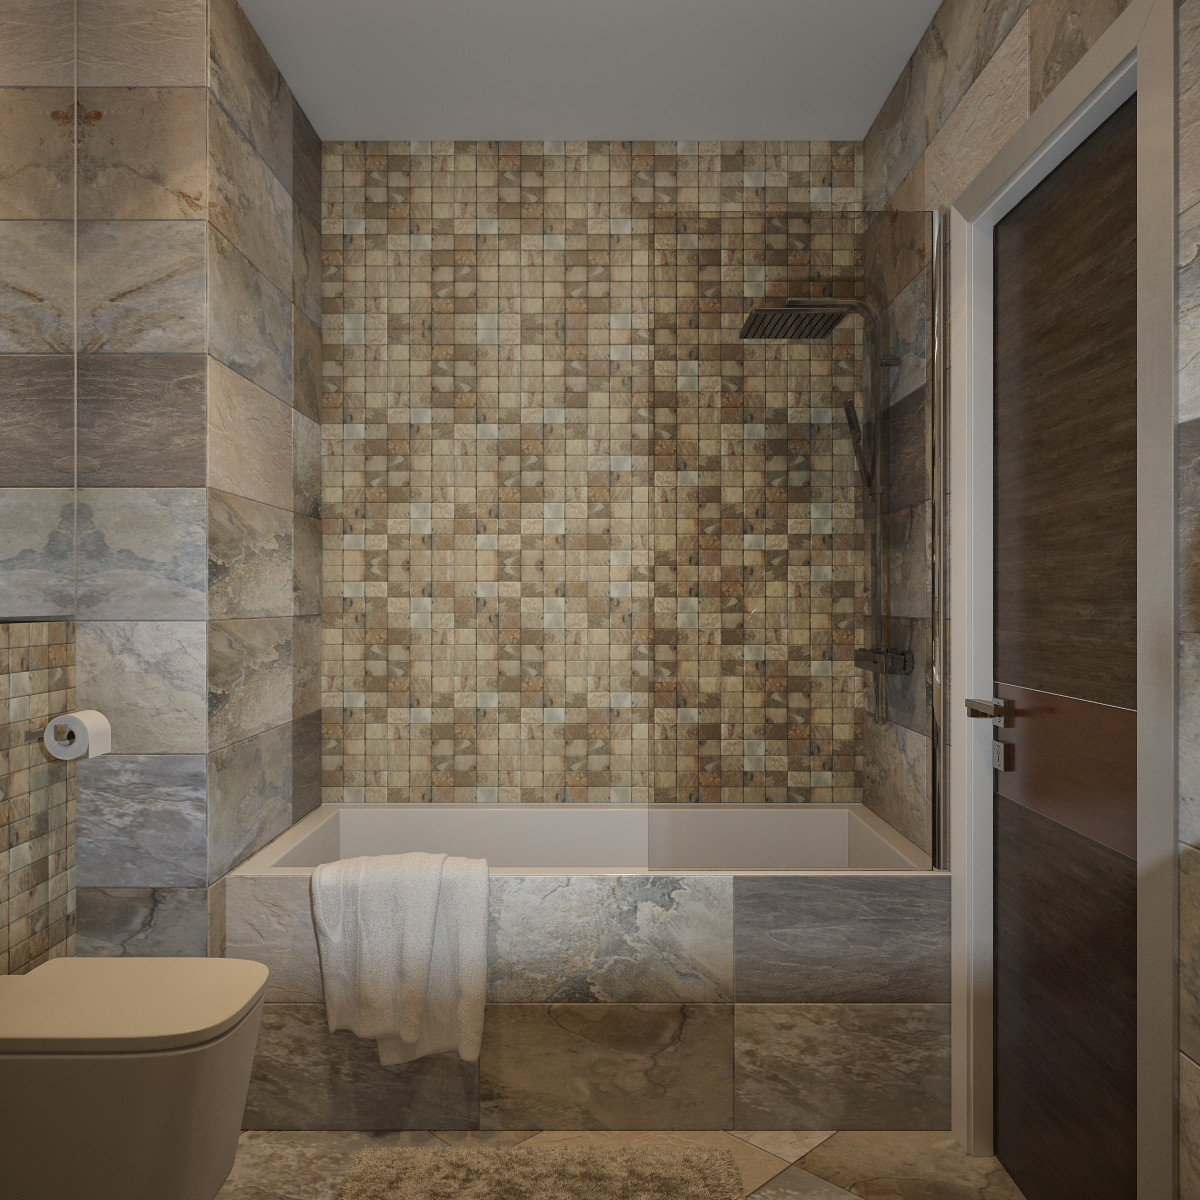 Mosaic Tile Bathroom
 30 cool ideas and pictures of natural stone bathroom